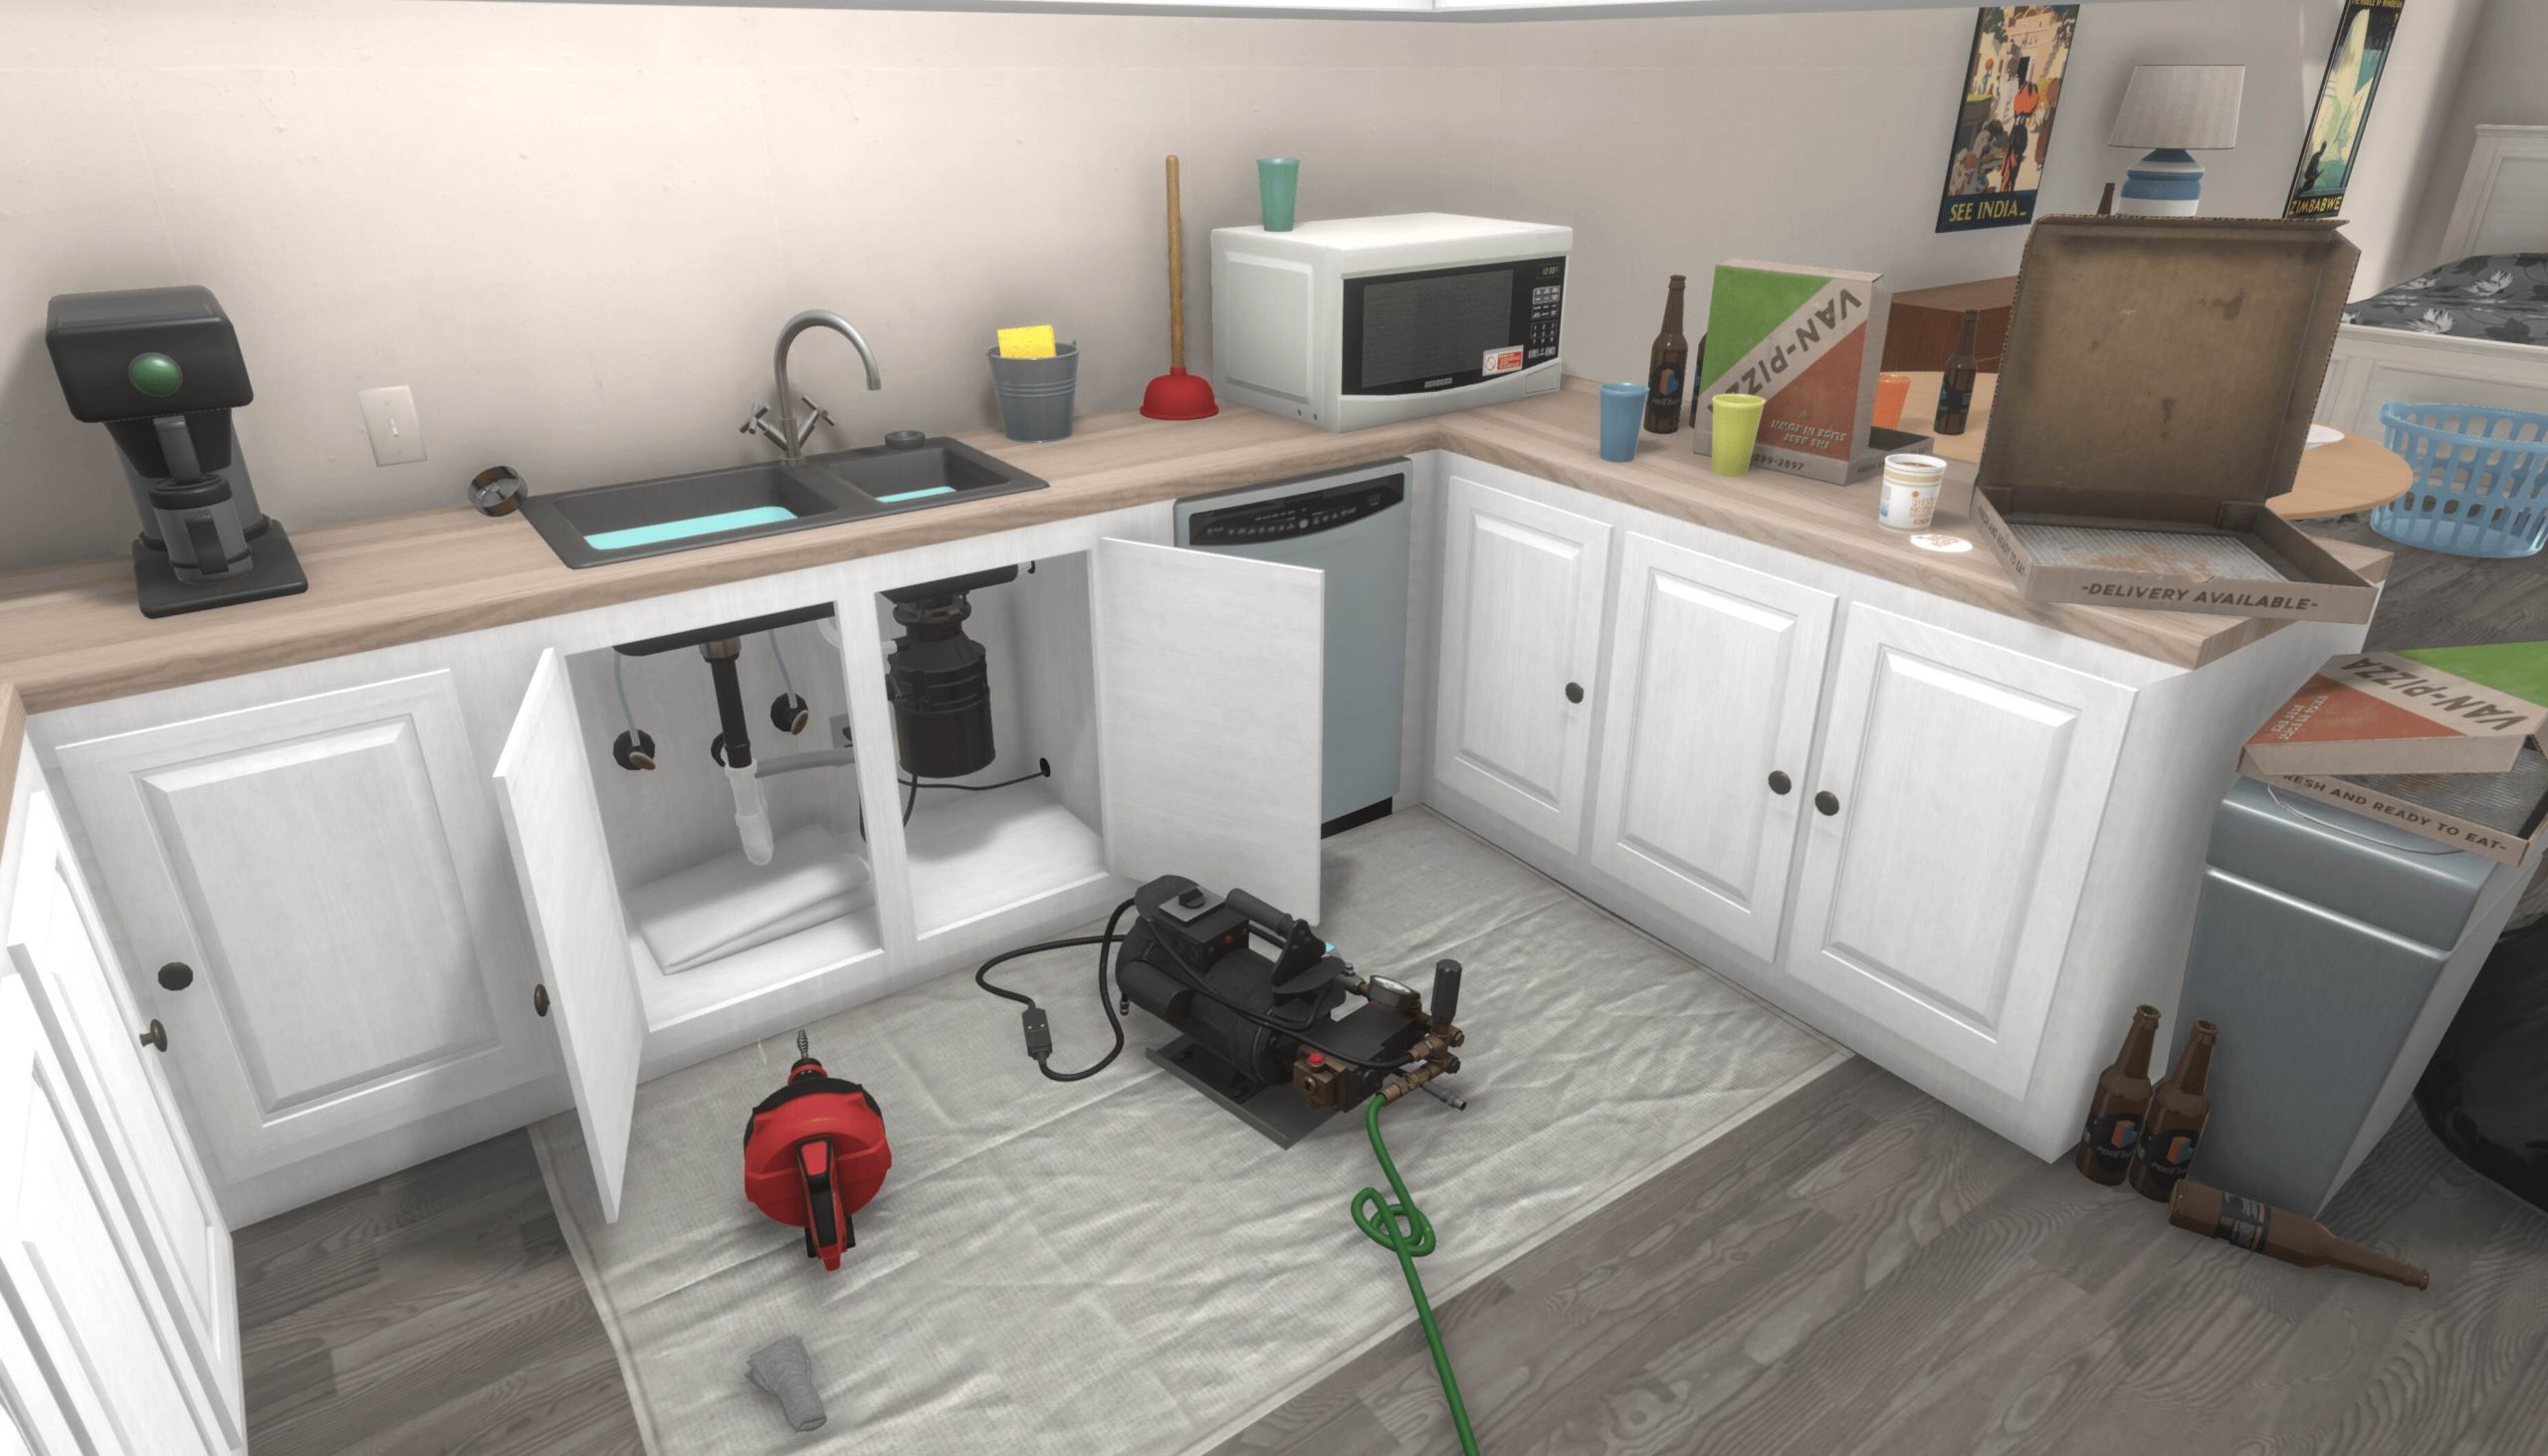 A 3D training simulation of a kitchen sink repair